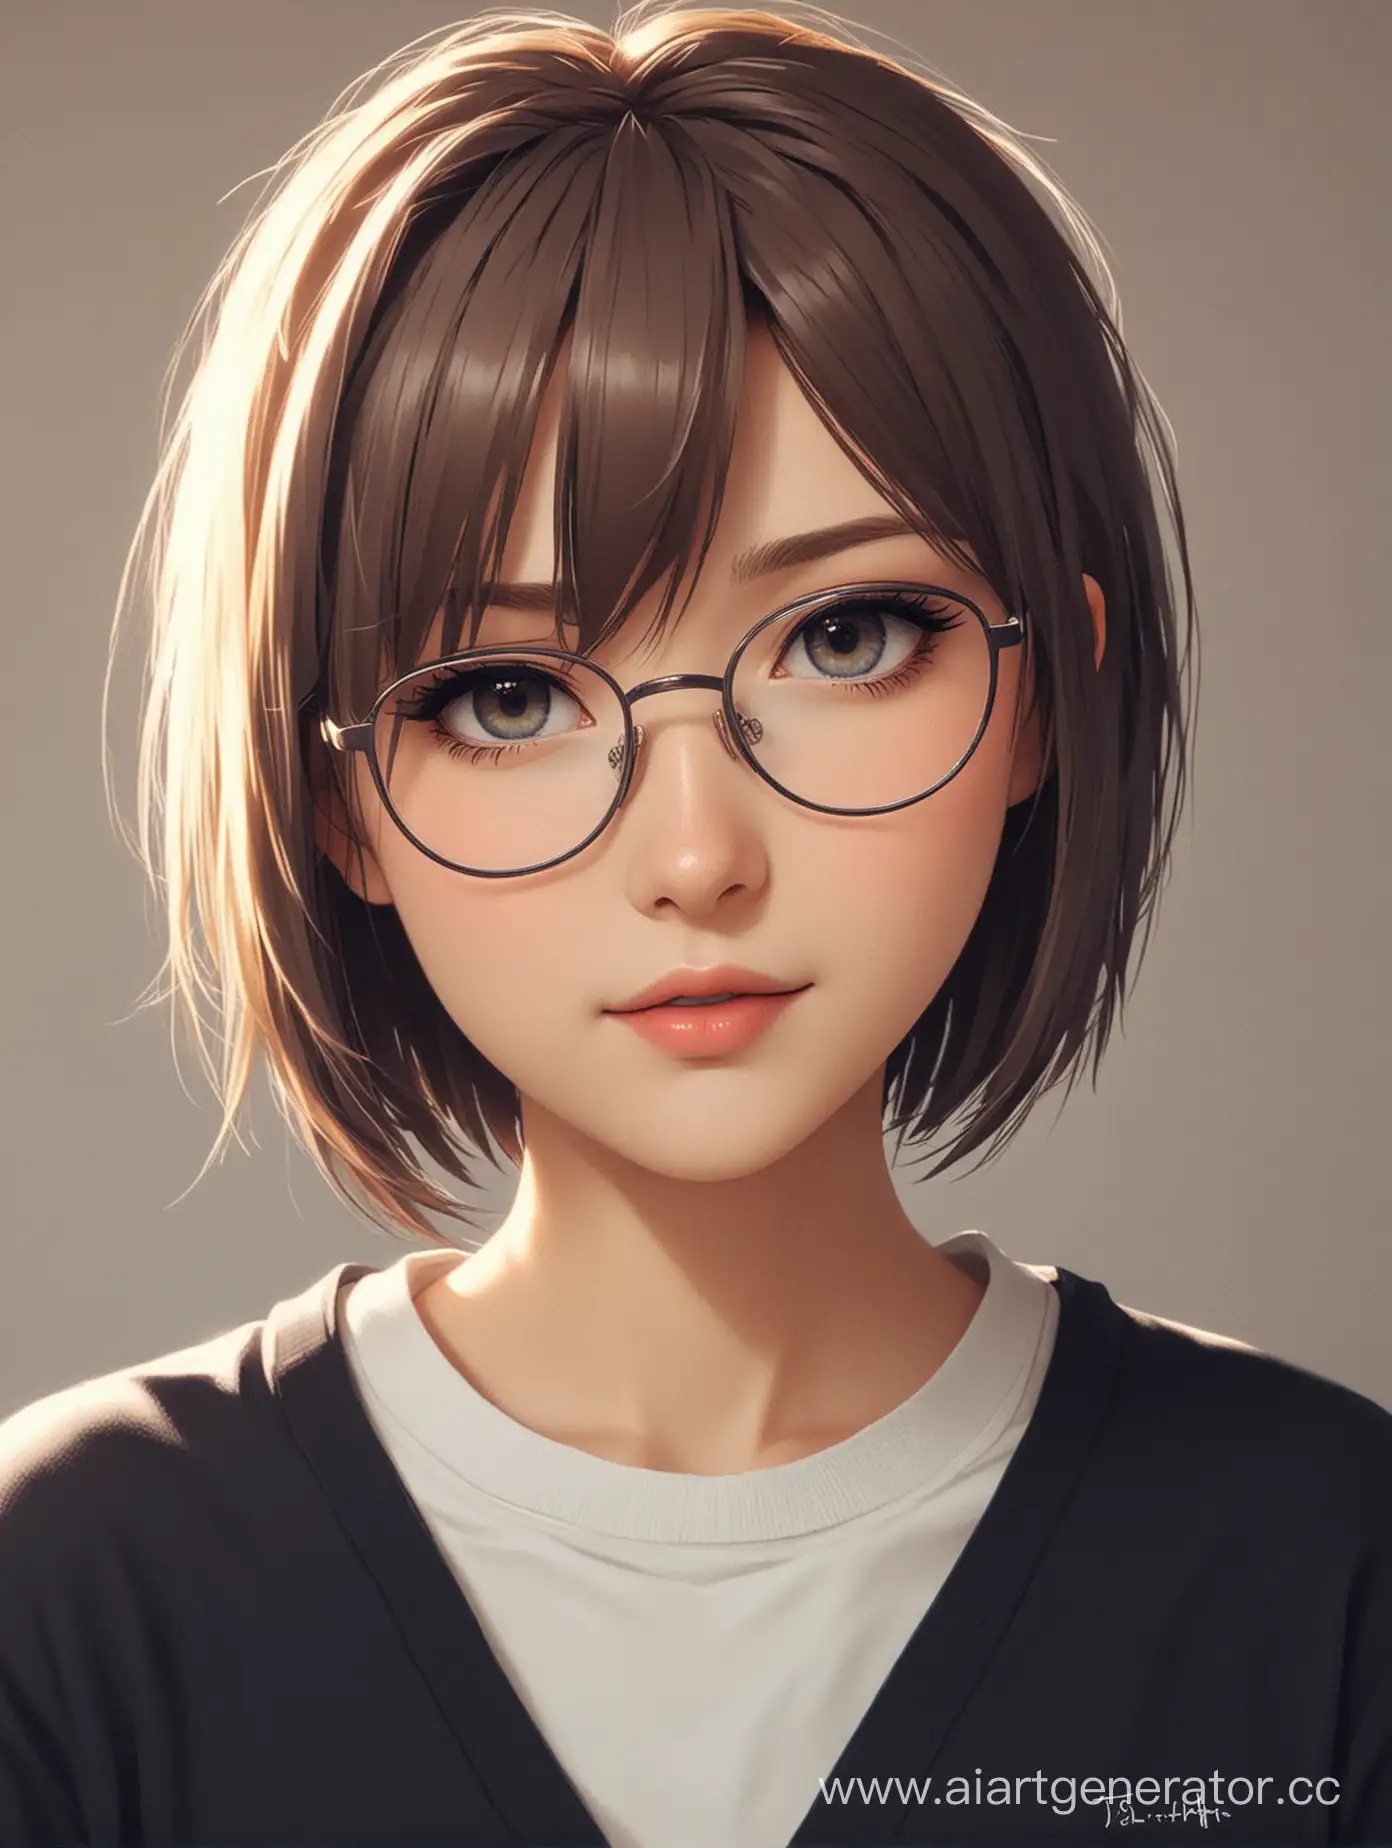 anime girl with glasses and short hair